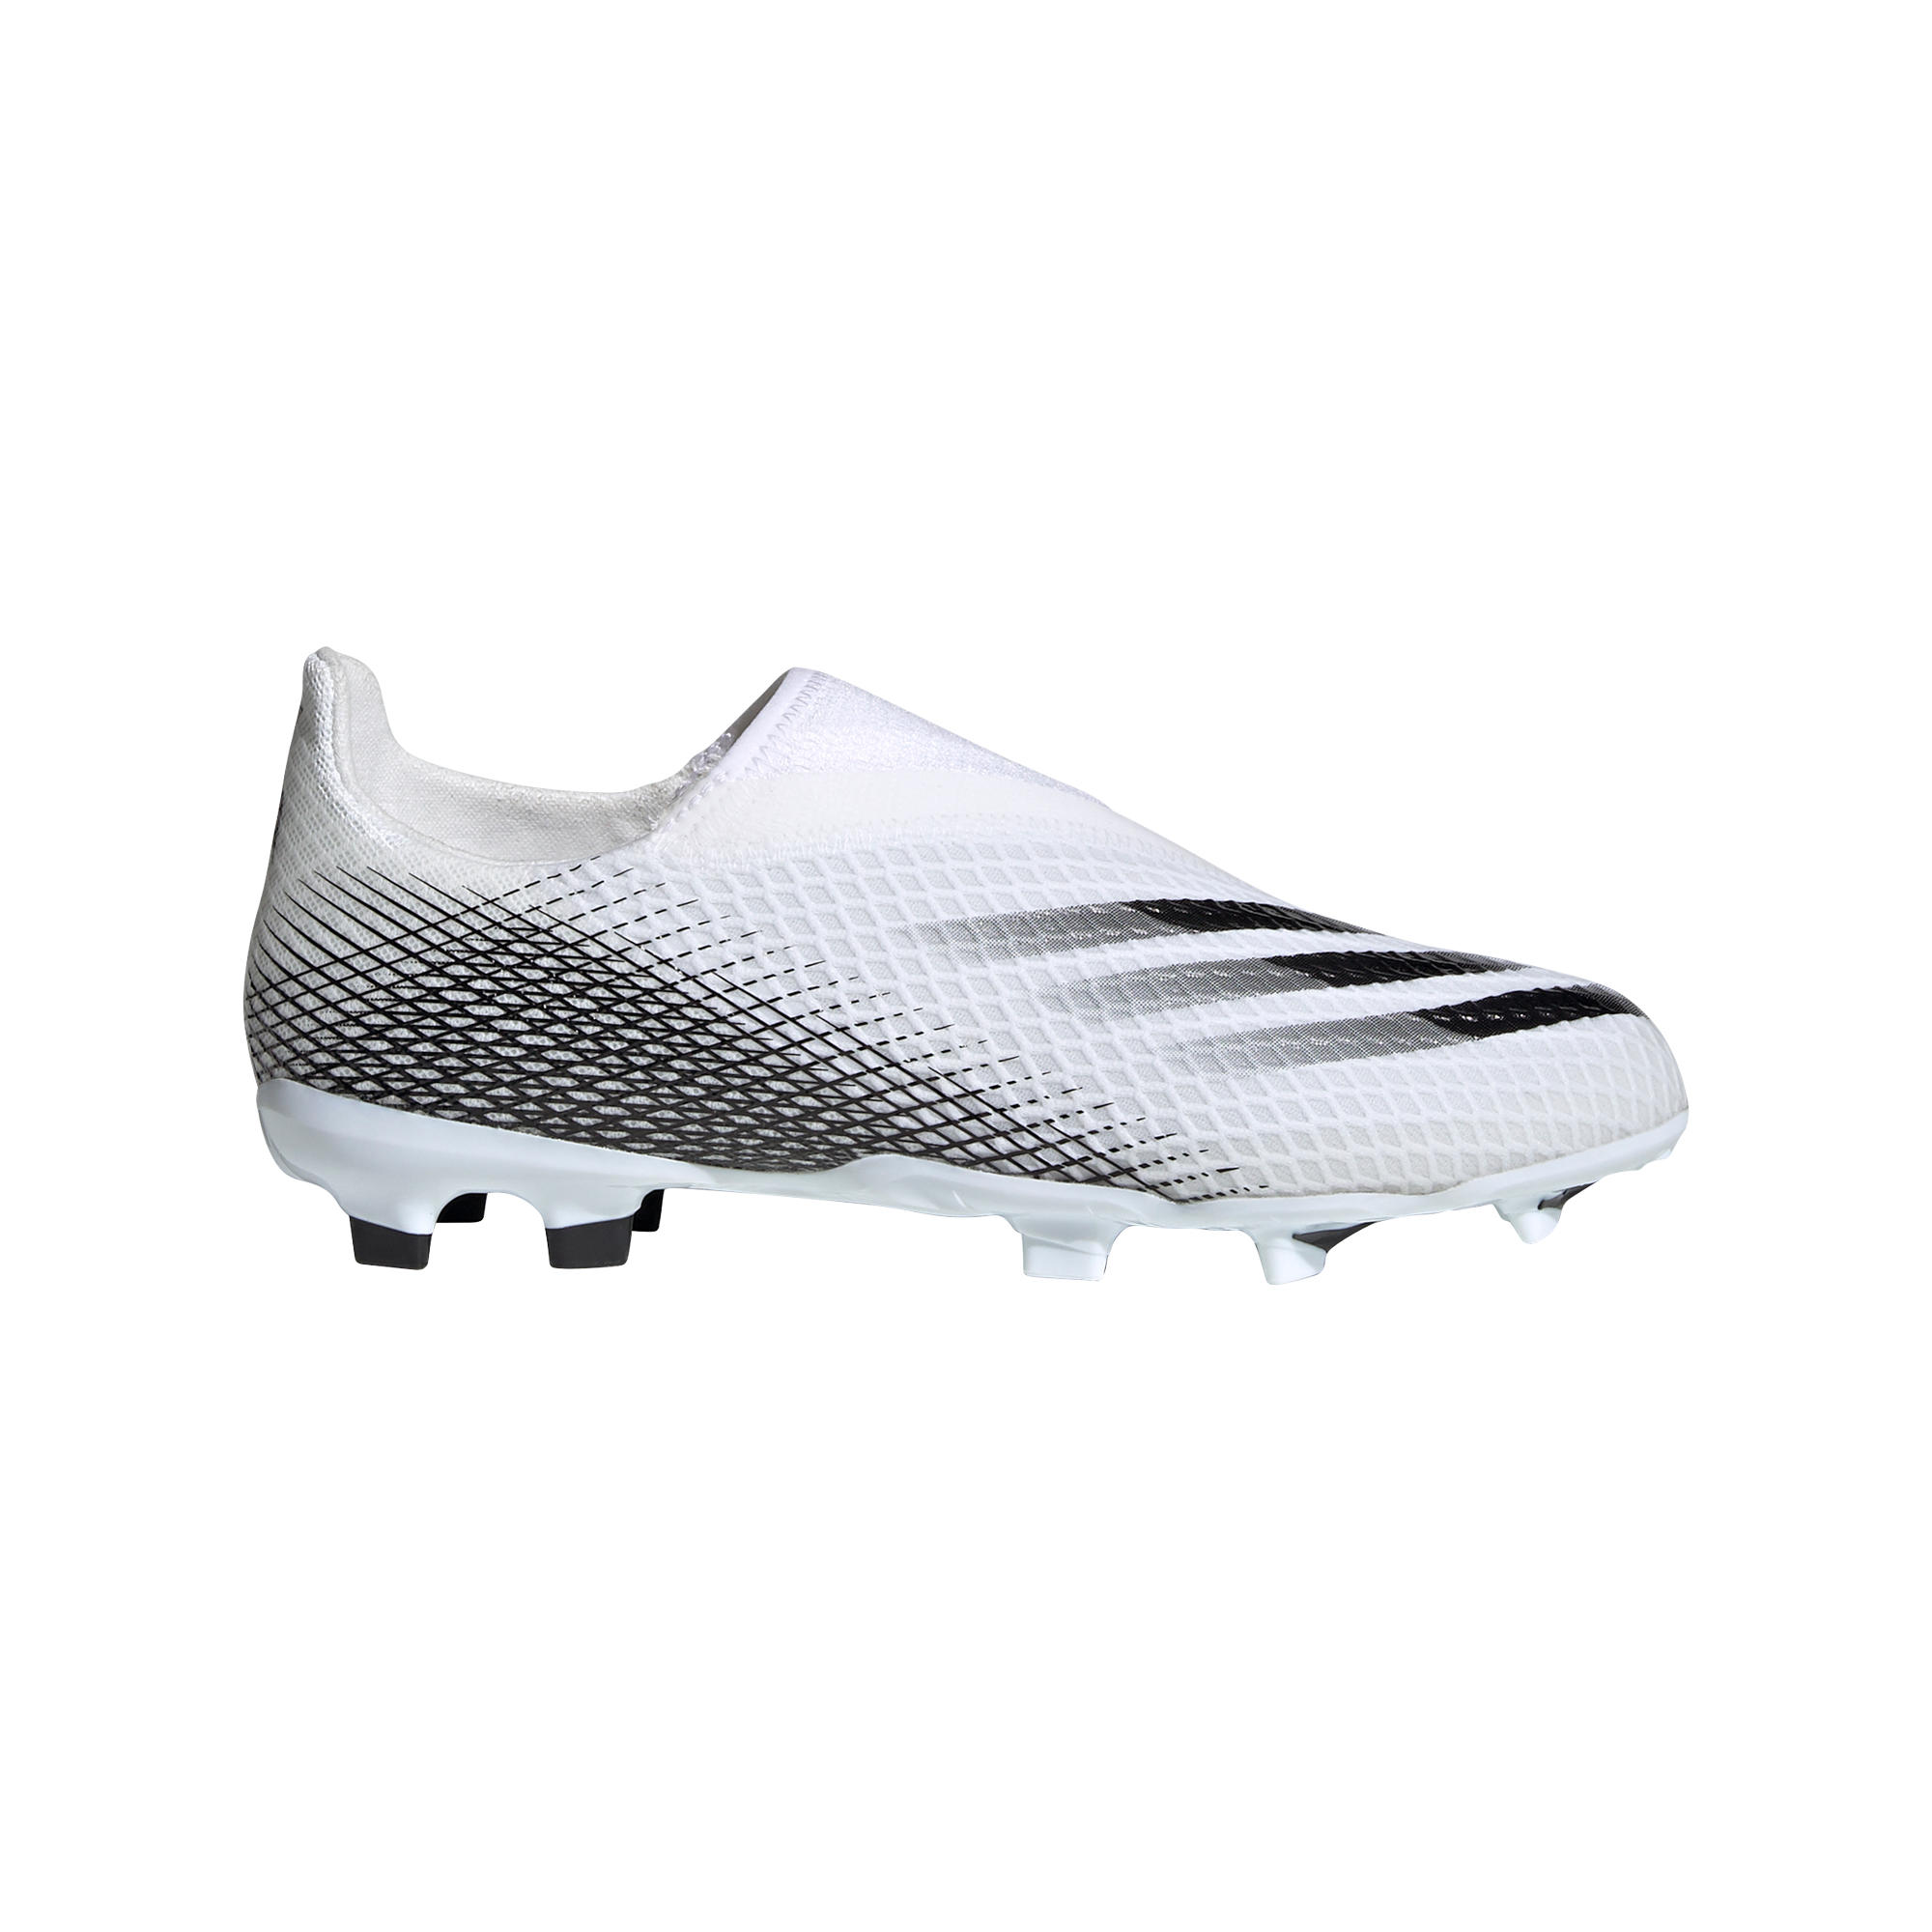 football boots bluewater, OFF 77%,Buy!